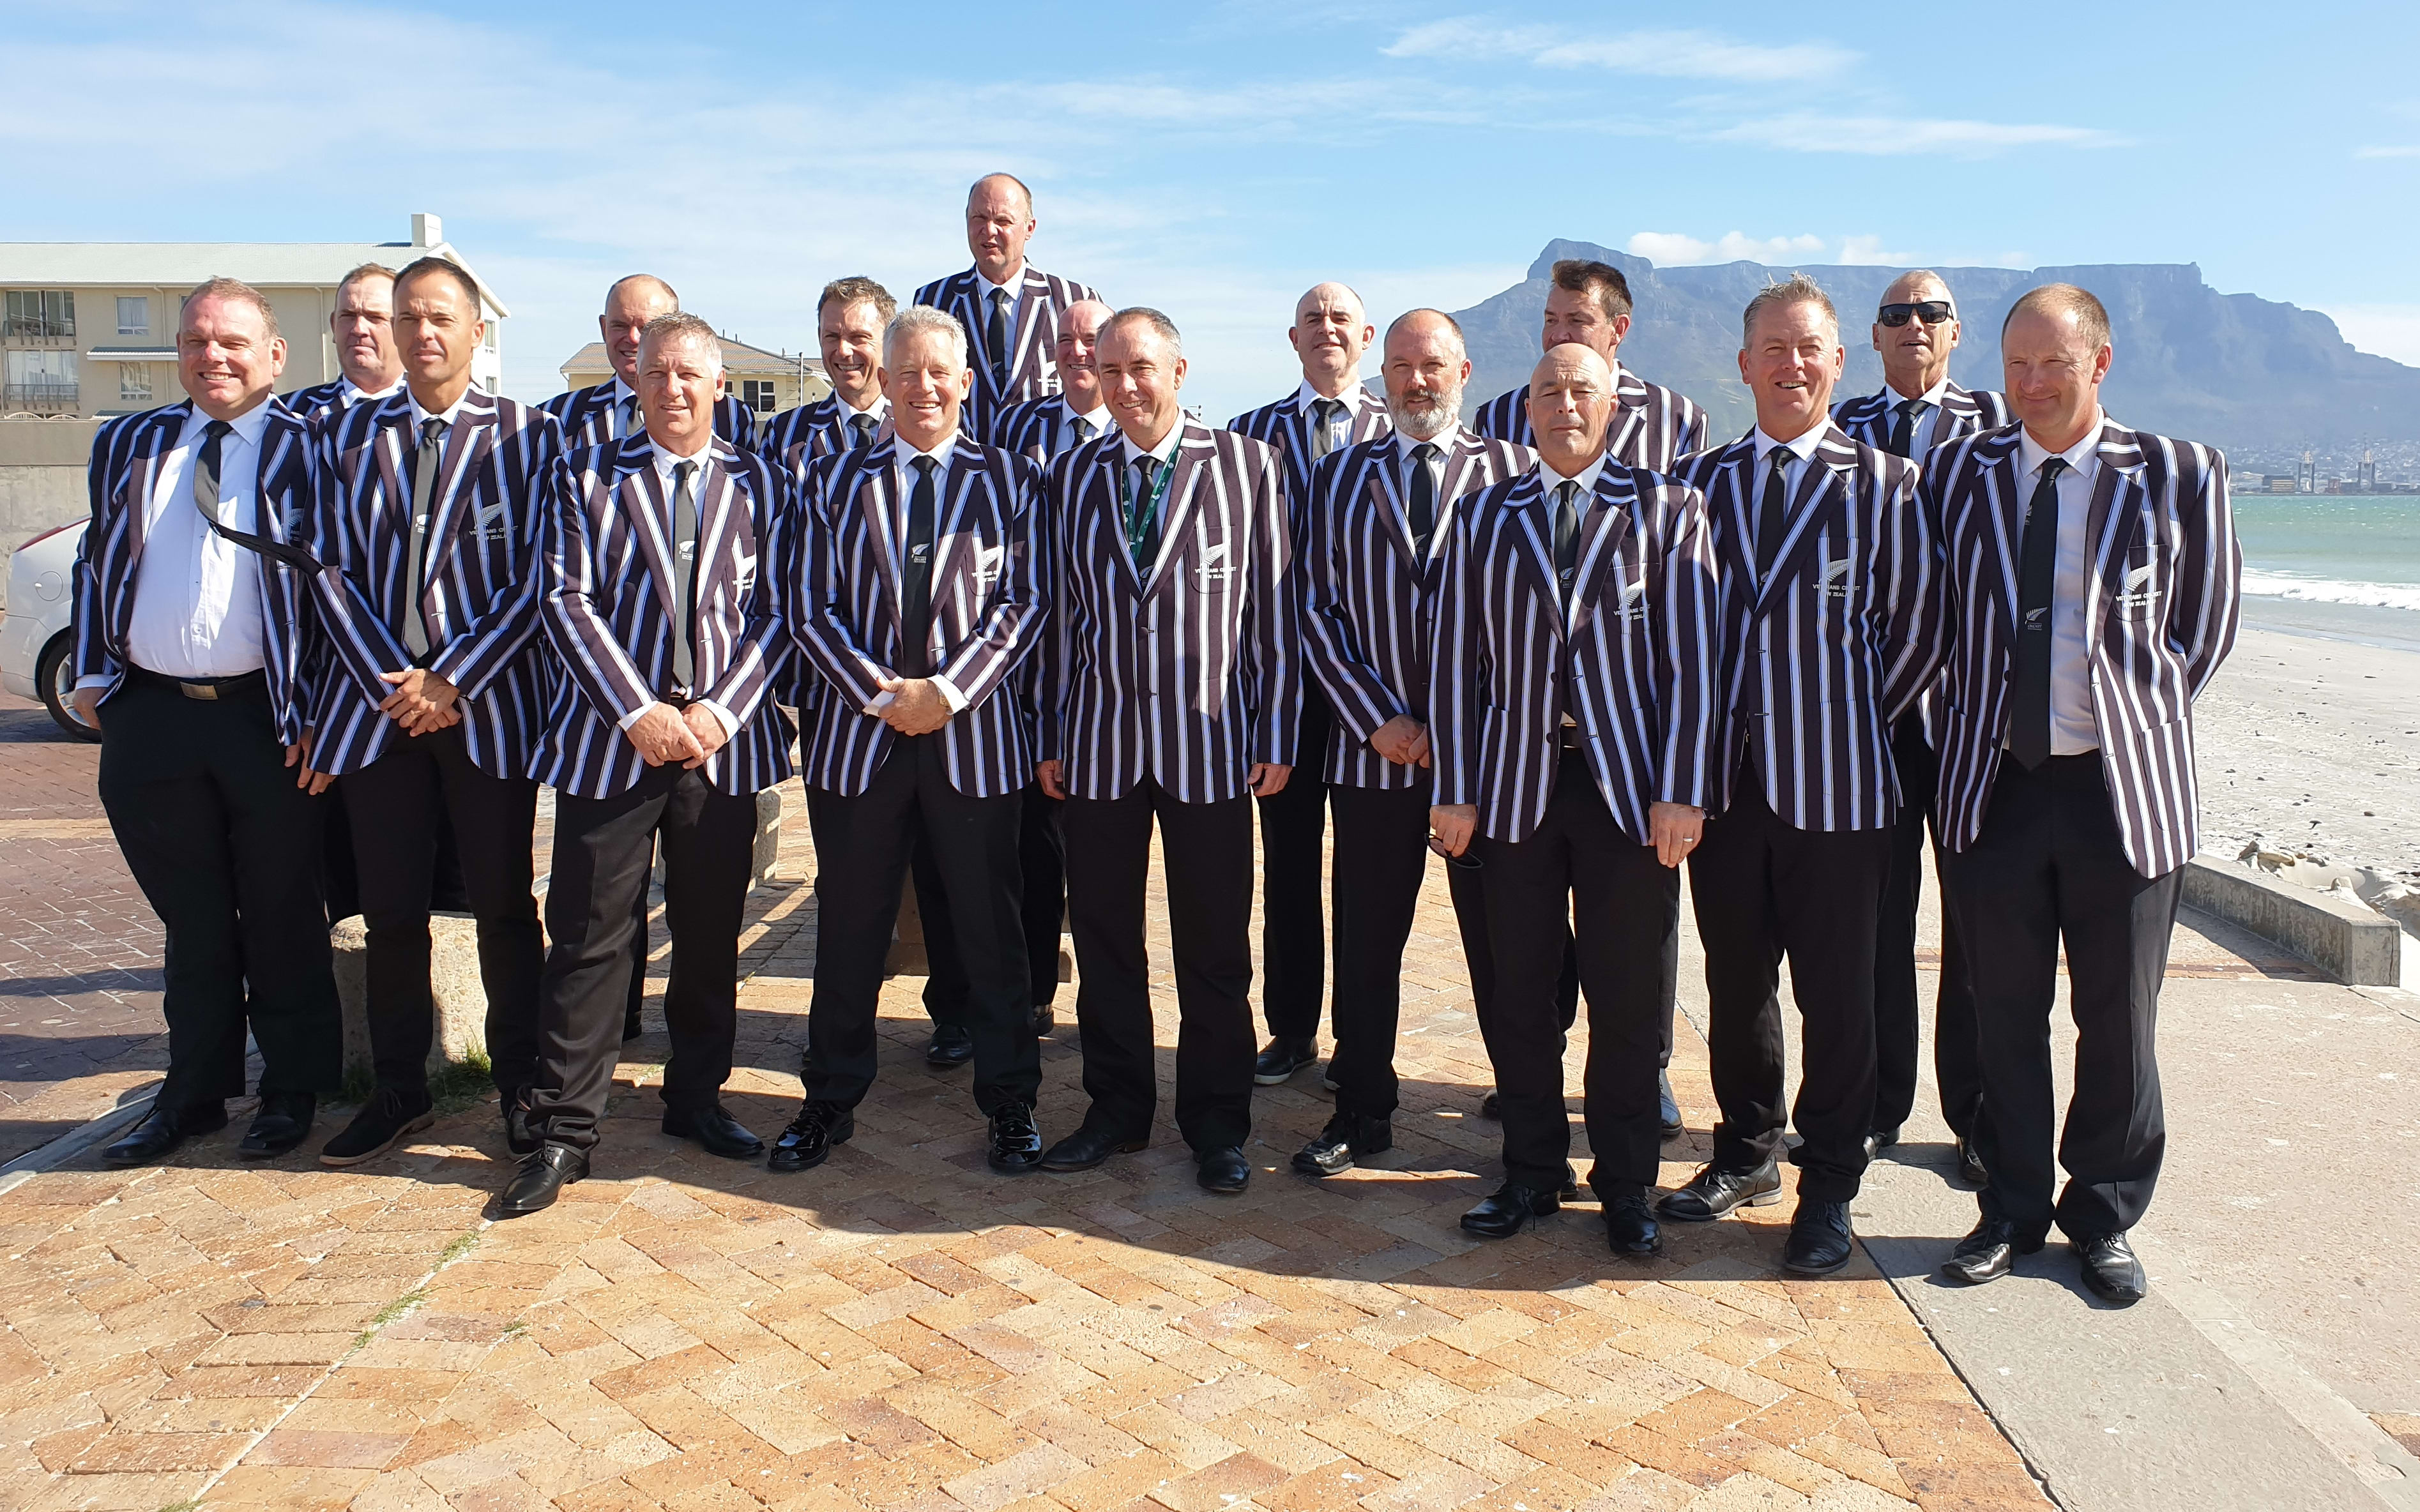 The New Zealand over 50s cricket team at the World Cup in Cape Town, South Africa.